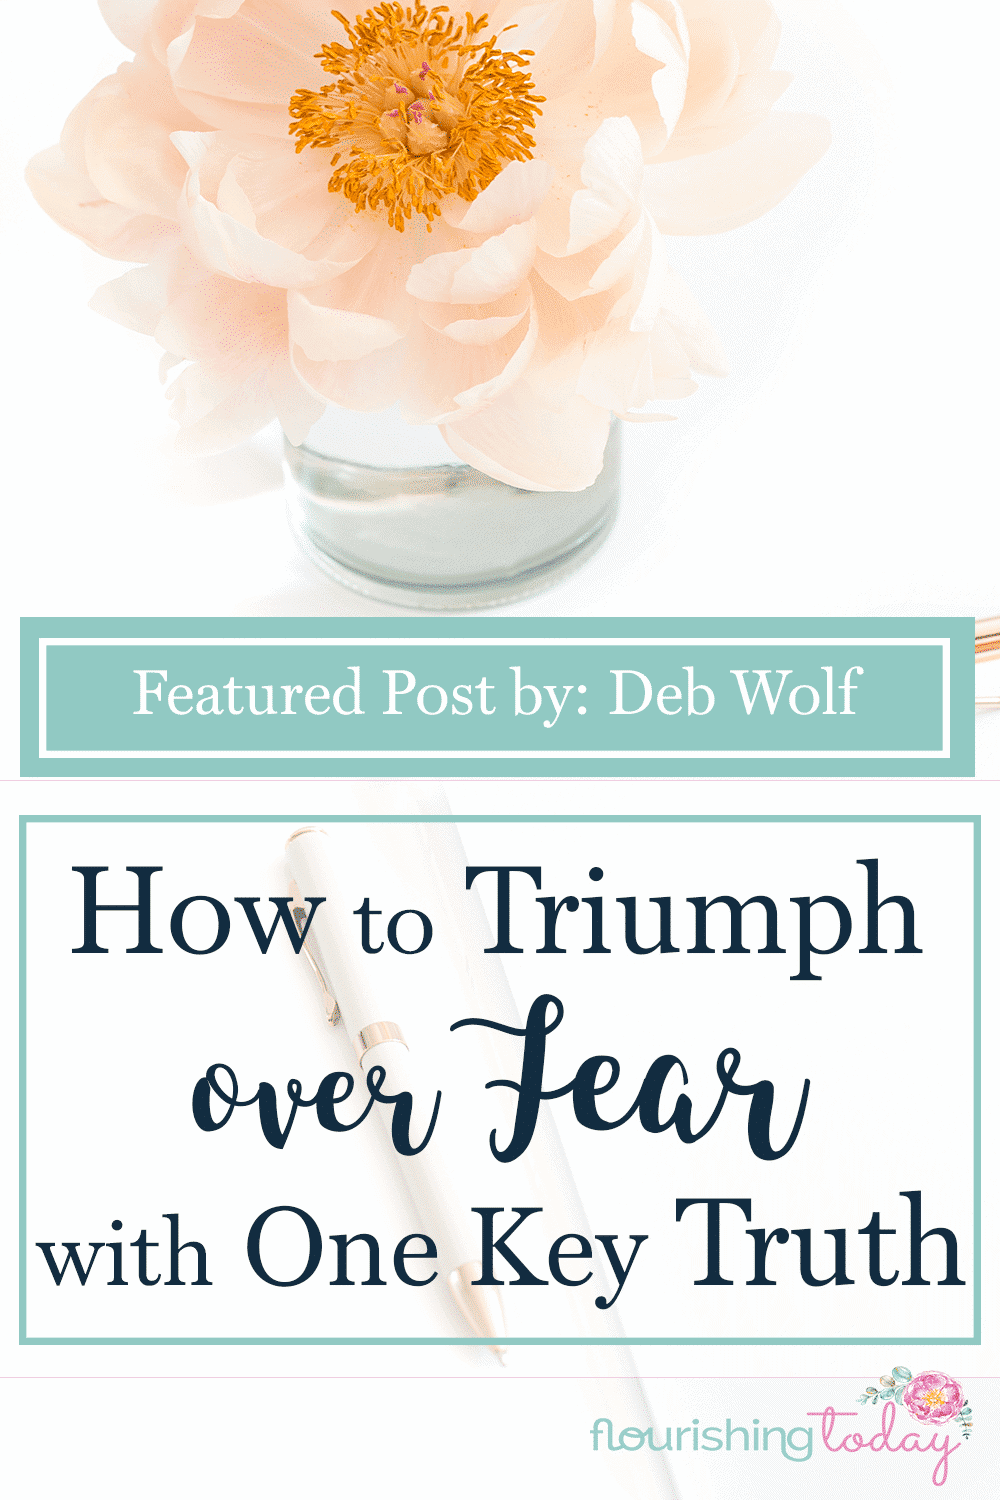 Do you wrestle with how to get over the fear that plagues you? Are you ready to triumph over fear? Here is one truth that help you to conquer your fears!